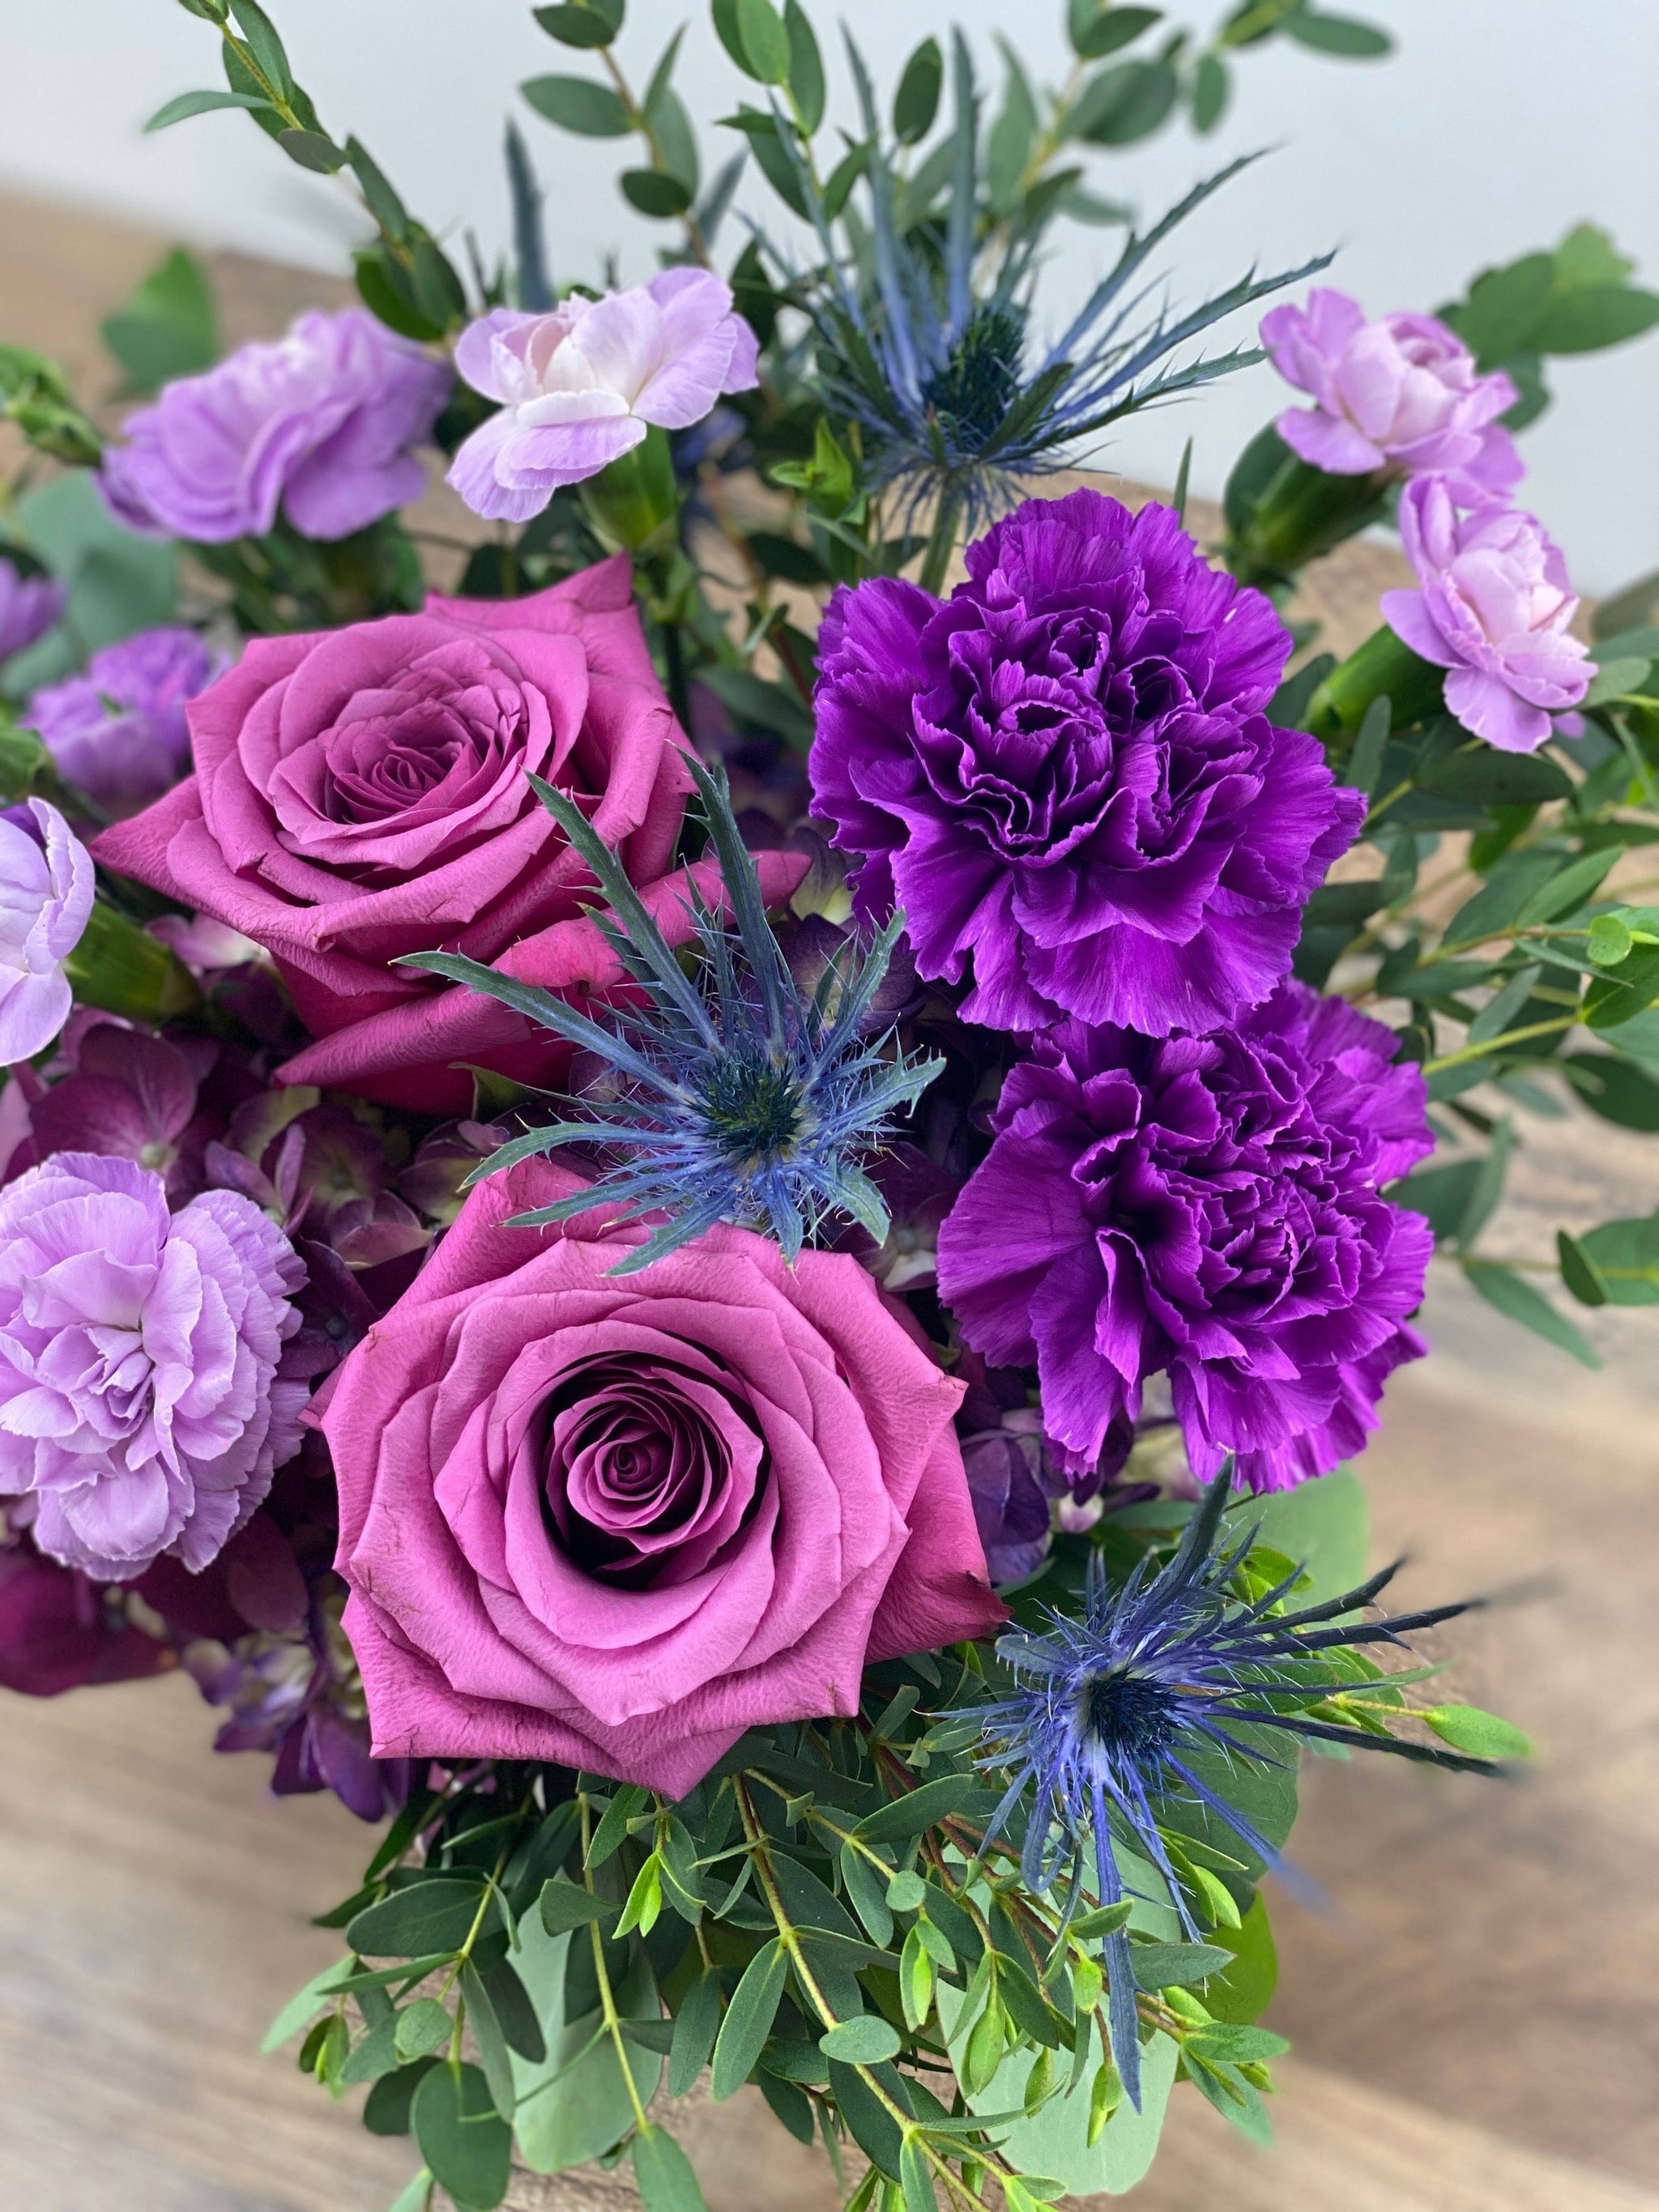 Village Floral Designs & Gifts is a funeral home and florist in Metamora, Illinois. We offer online flowers delivery of sympathy flowers or plants to honor the life of your loved one.